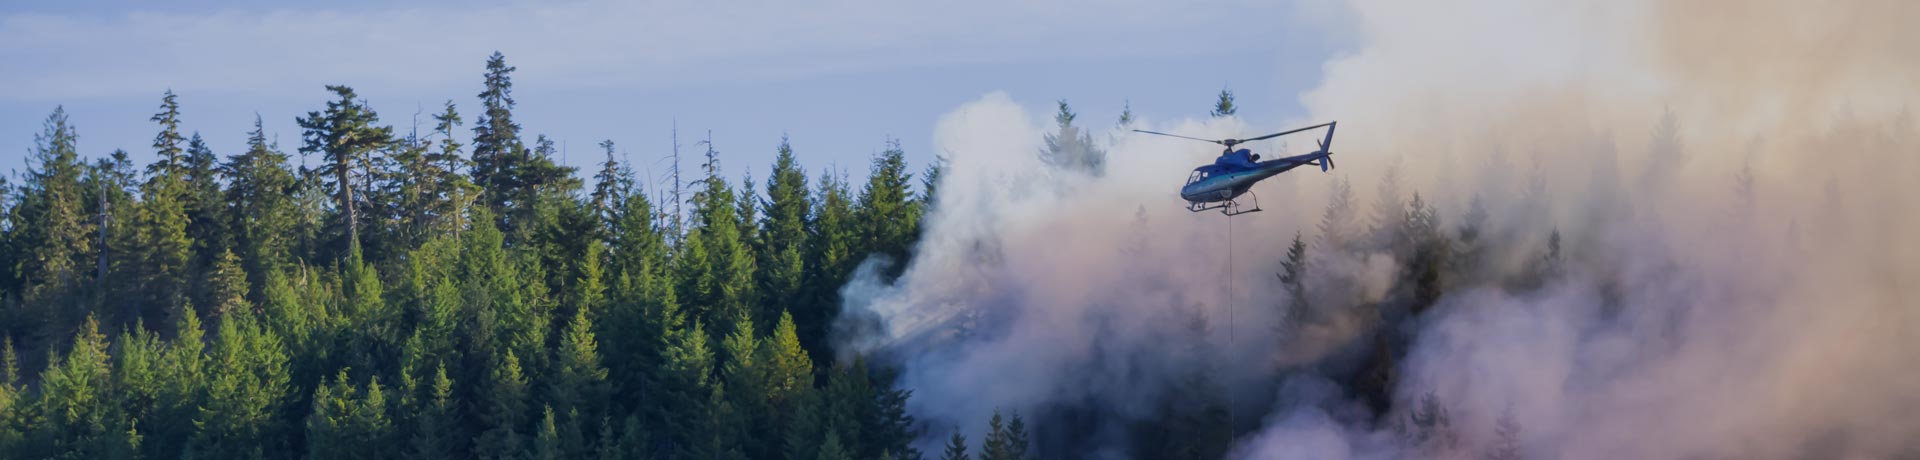 helicopter extinguishing a fire